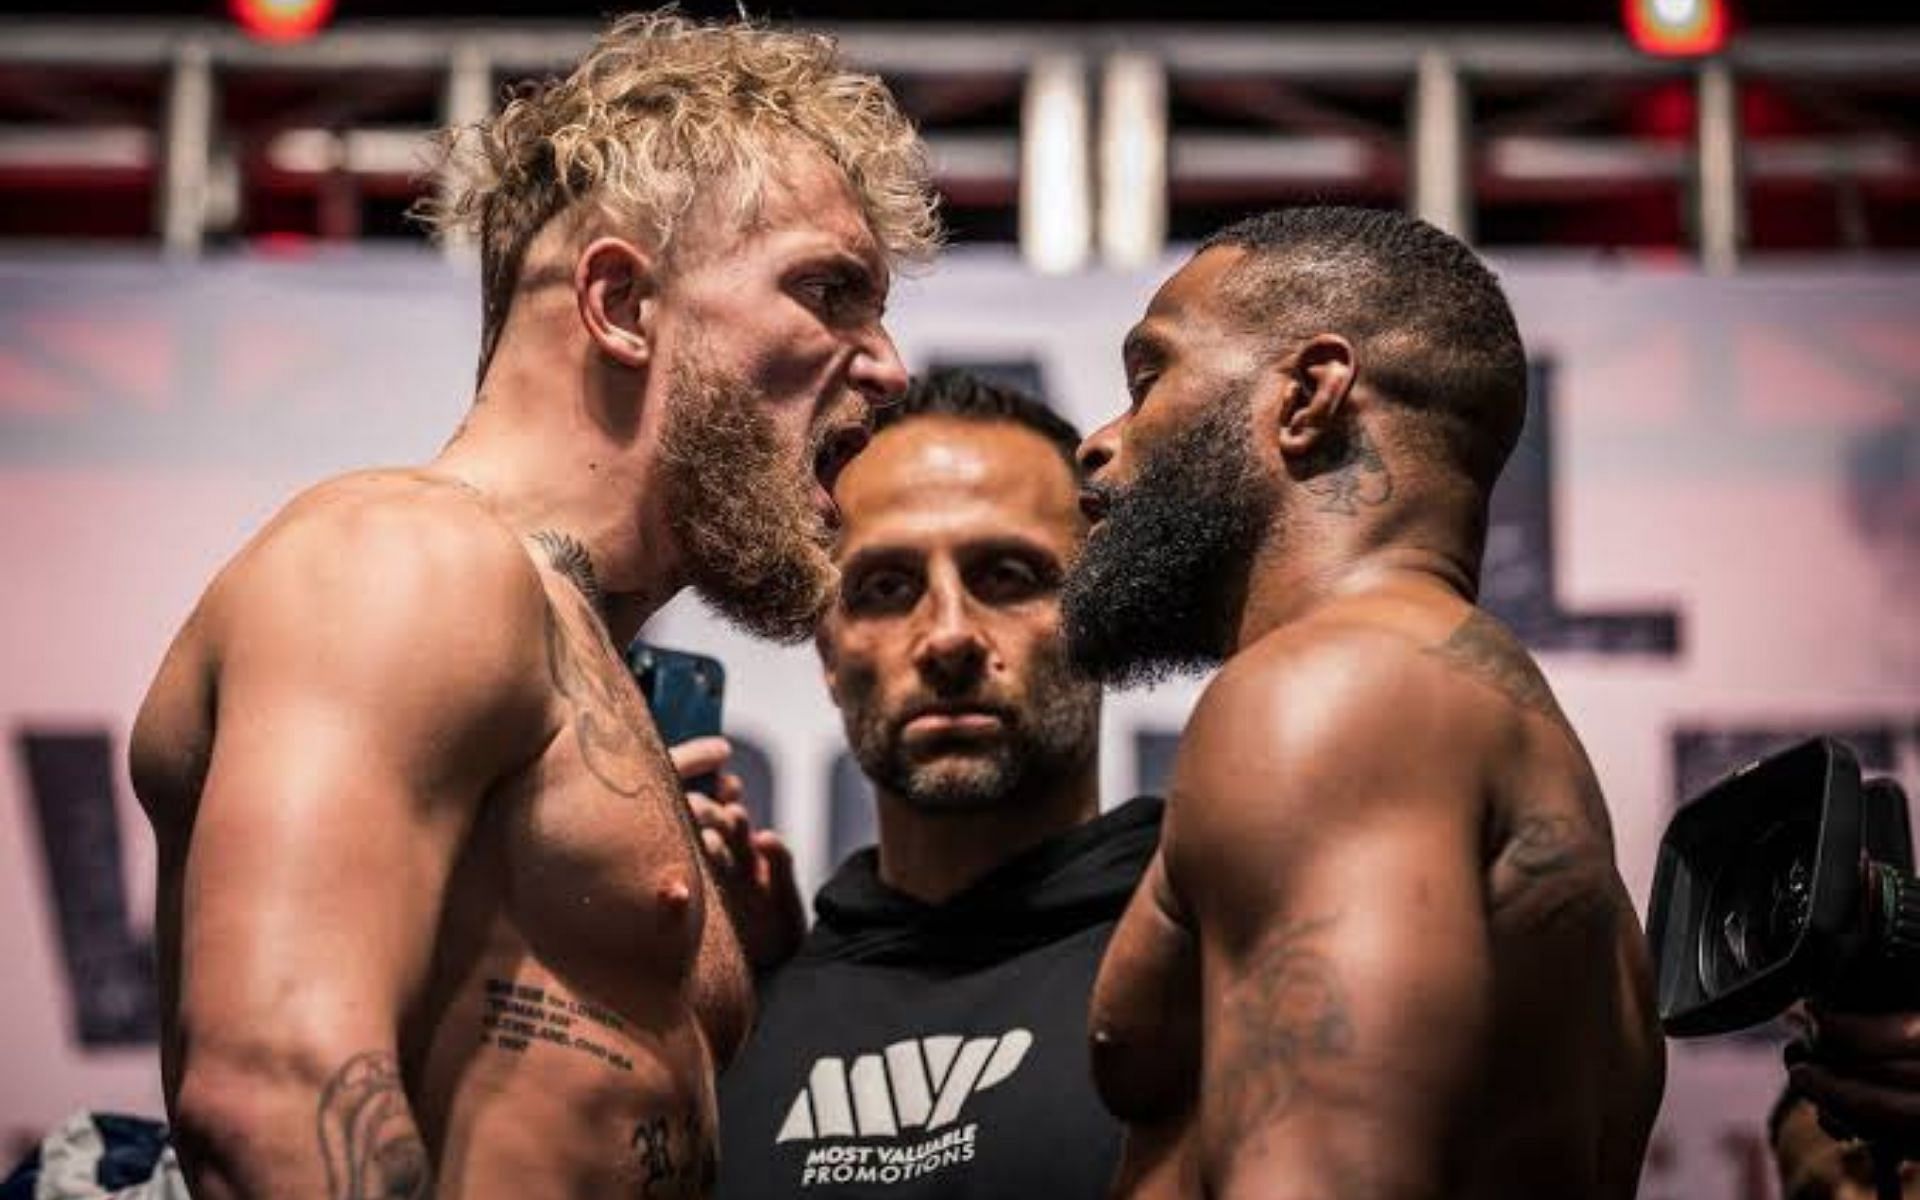 Jake Paul (left) Tyron Woodley (right) facing off before their fight